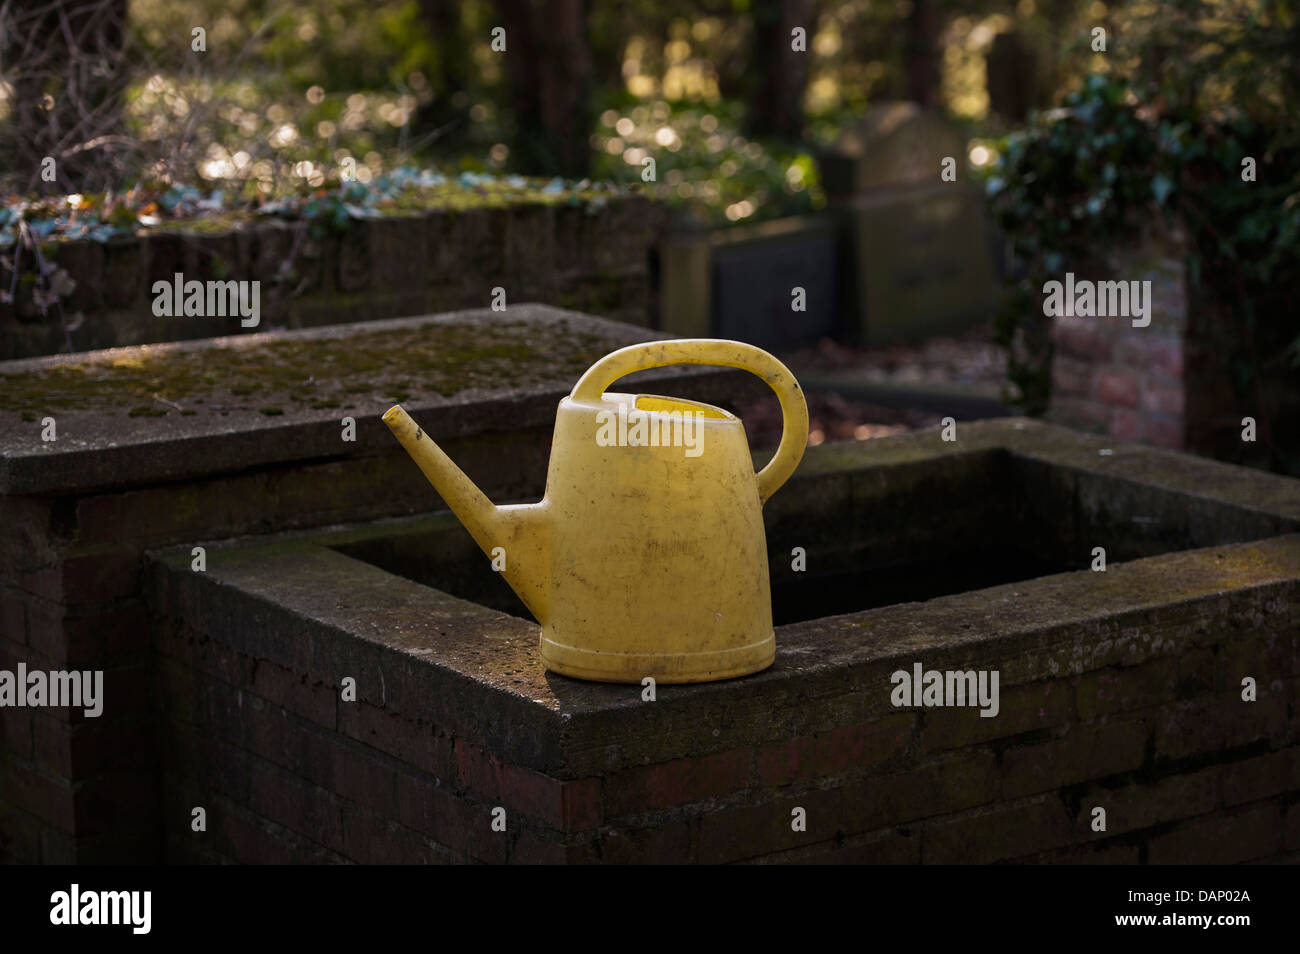 Germany, North Rhine Westphalia, Cologne, Watering can at cemetery Melatenfriedhof Stock Photo